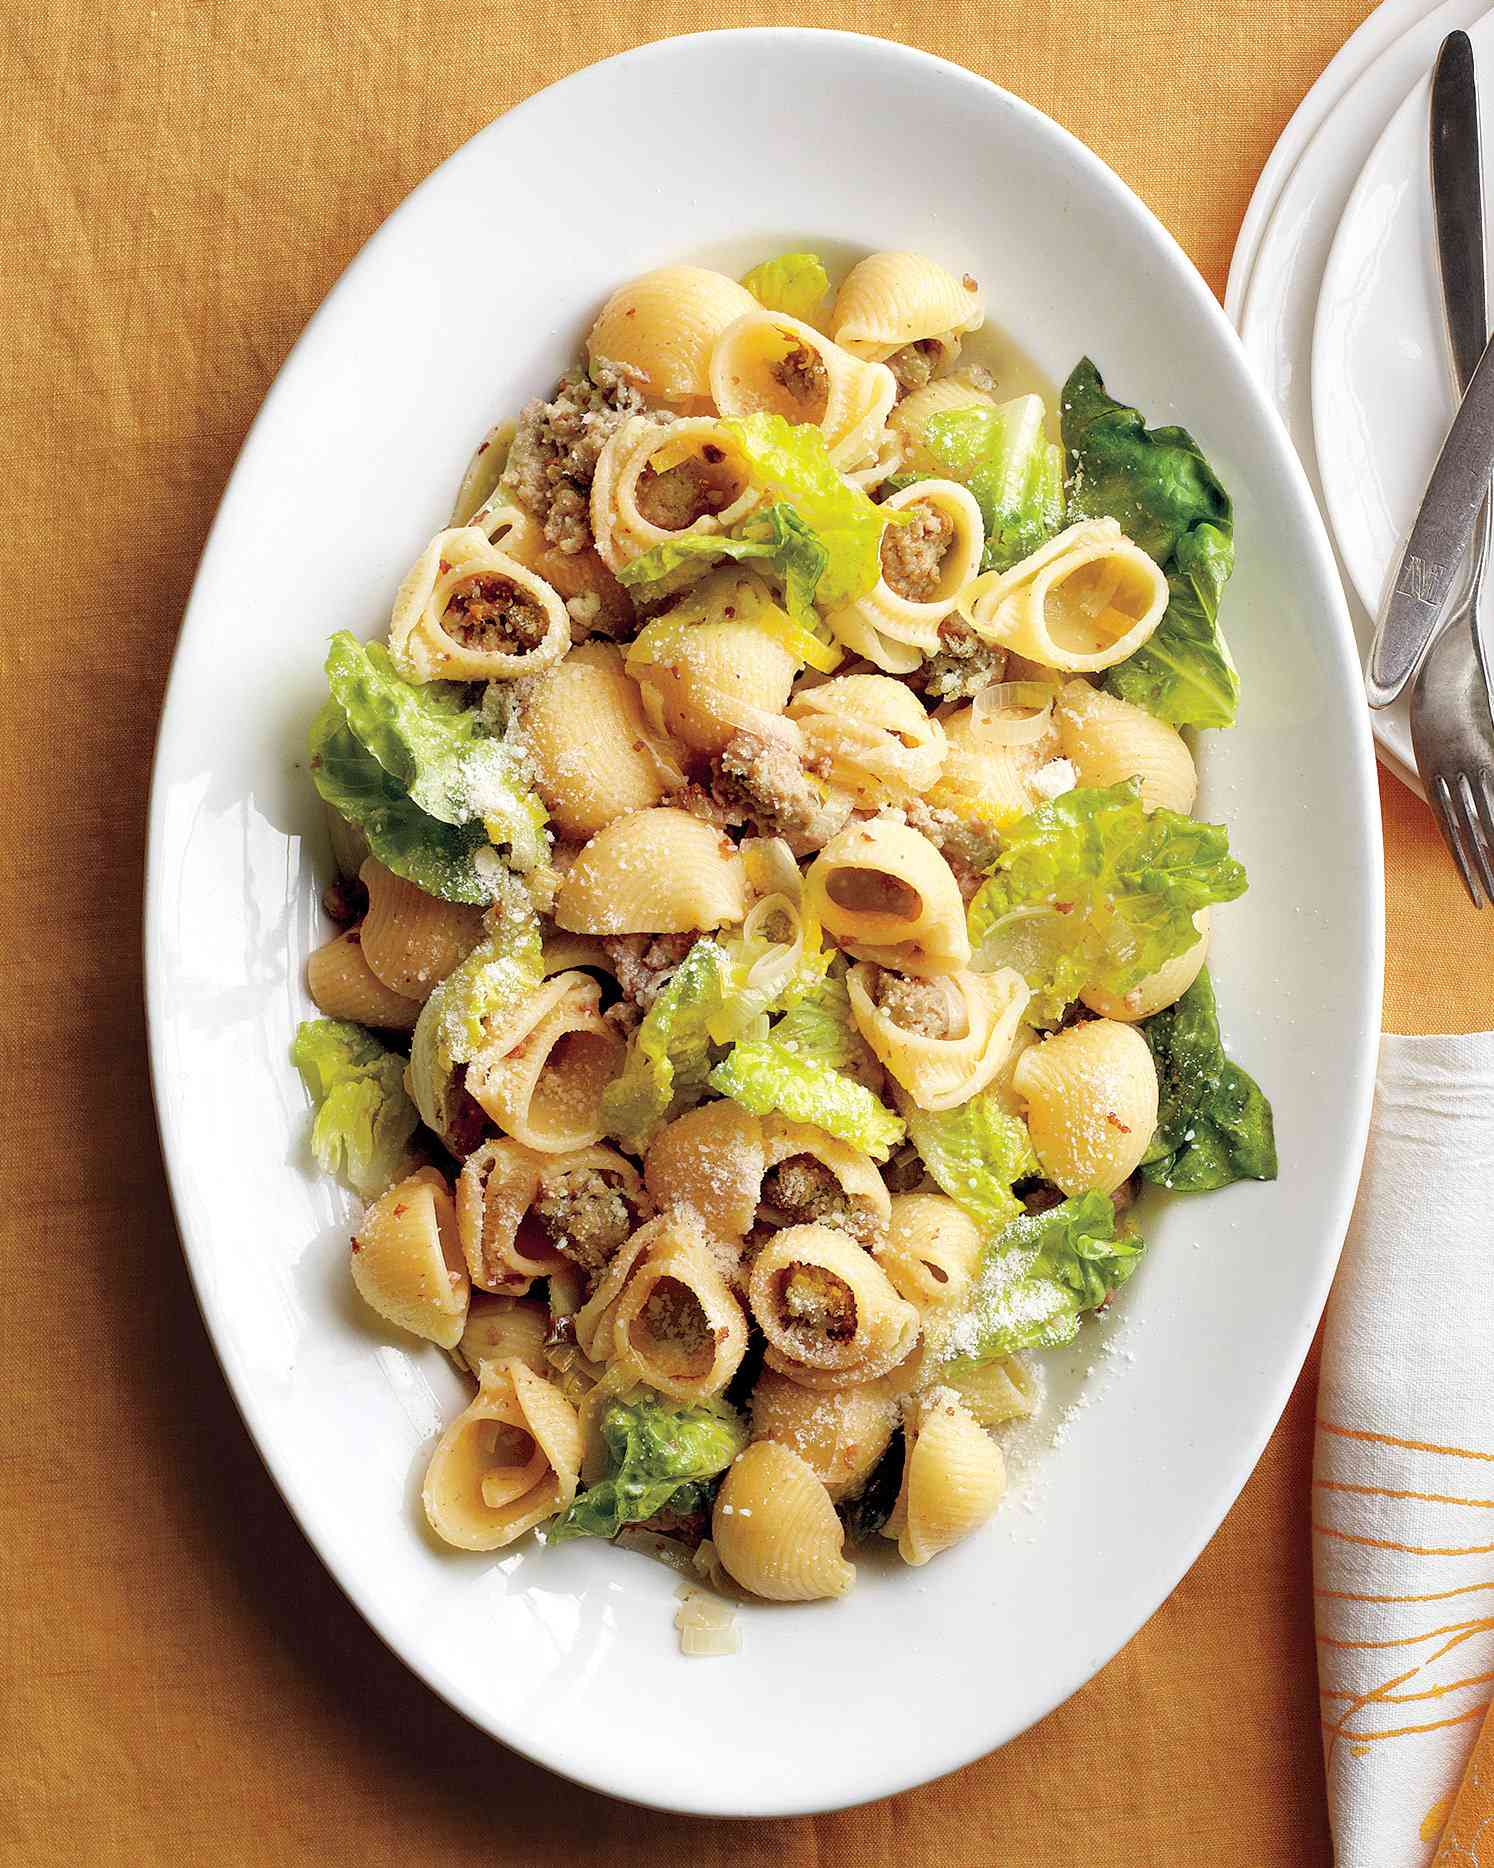 Pasta with Sausage, Leeks, and Lettuce